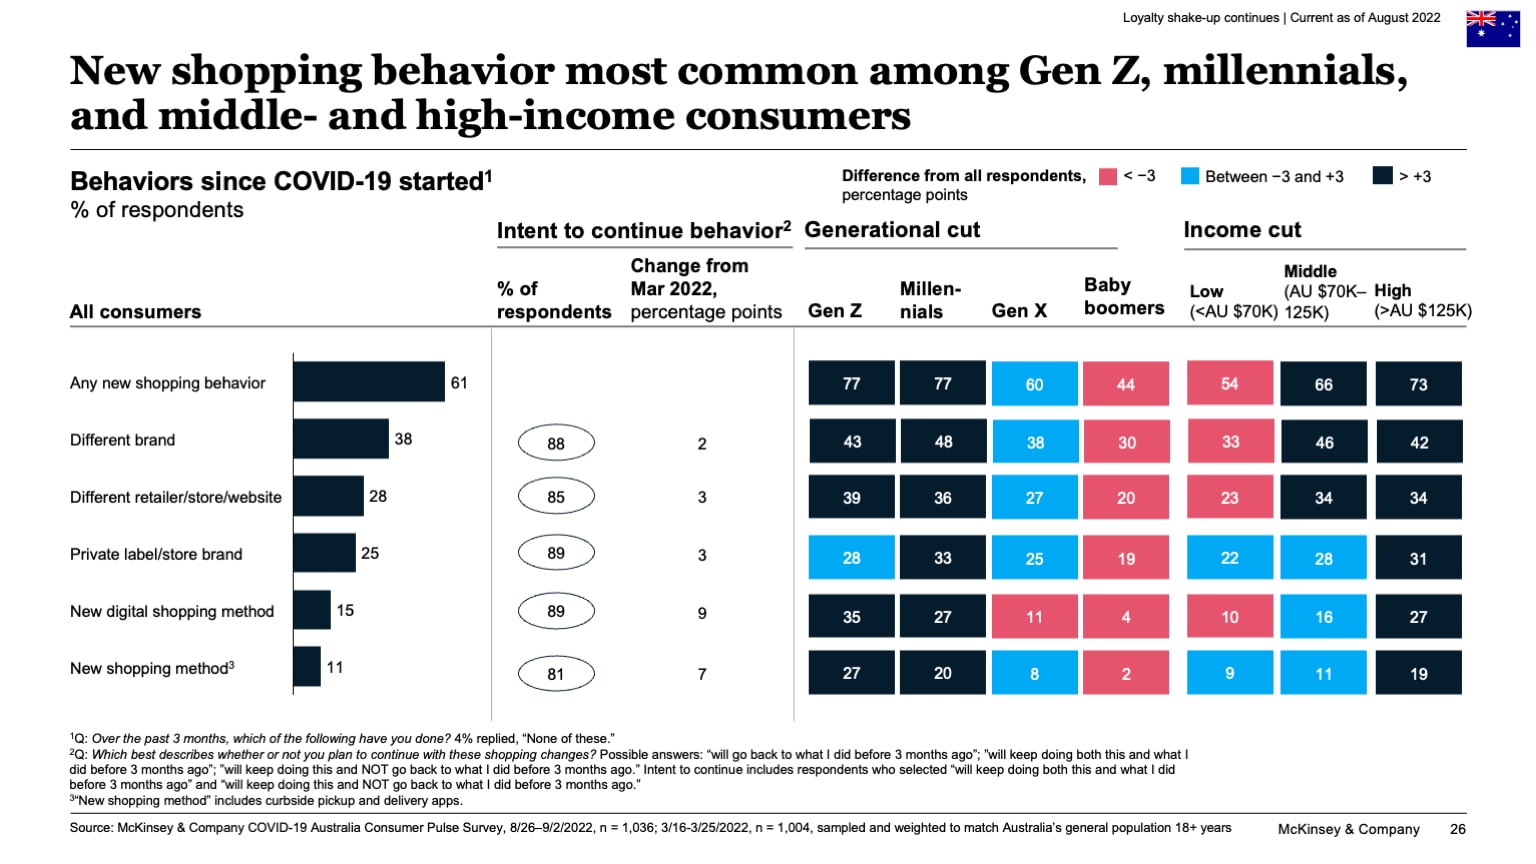 New shopping behavior most common among Gen Z, millennials, and middle- and high-income consumers